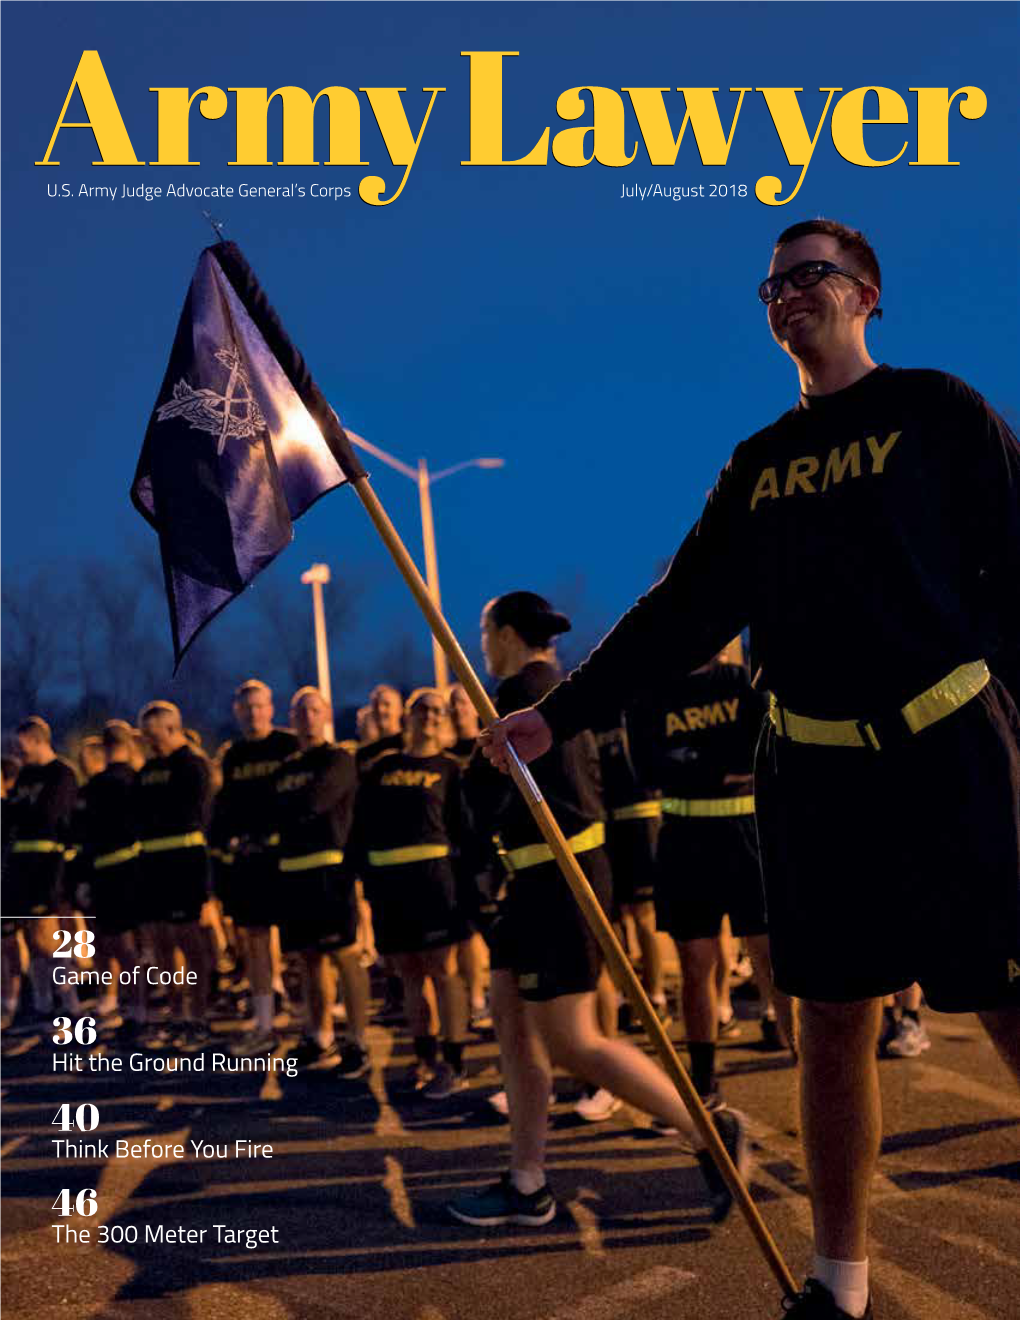 Army Lawyer, July/August 2018